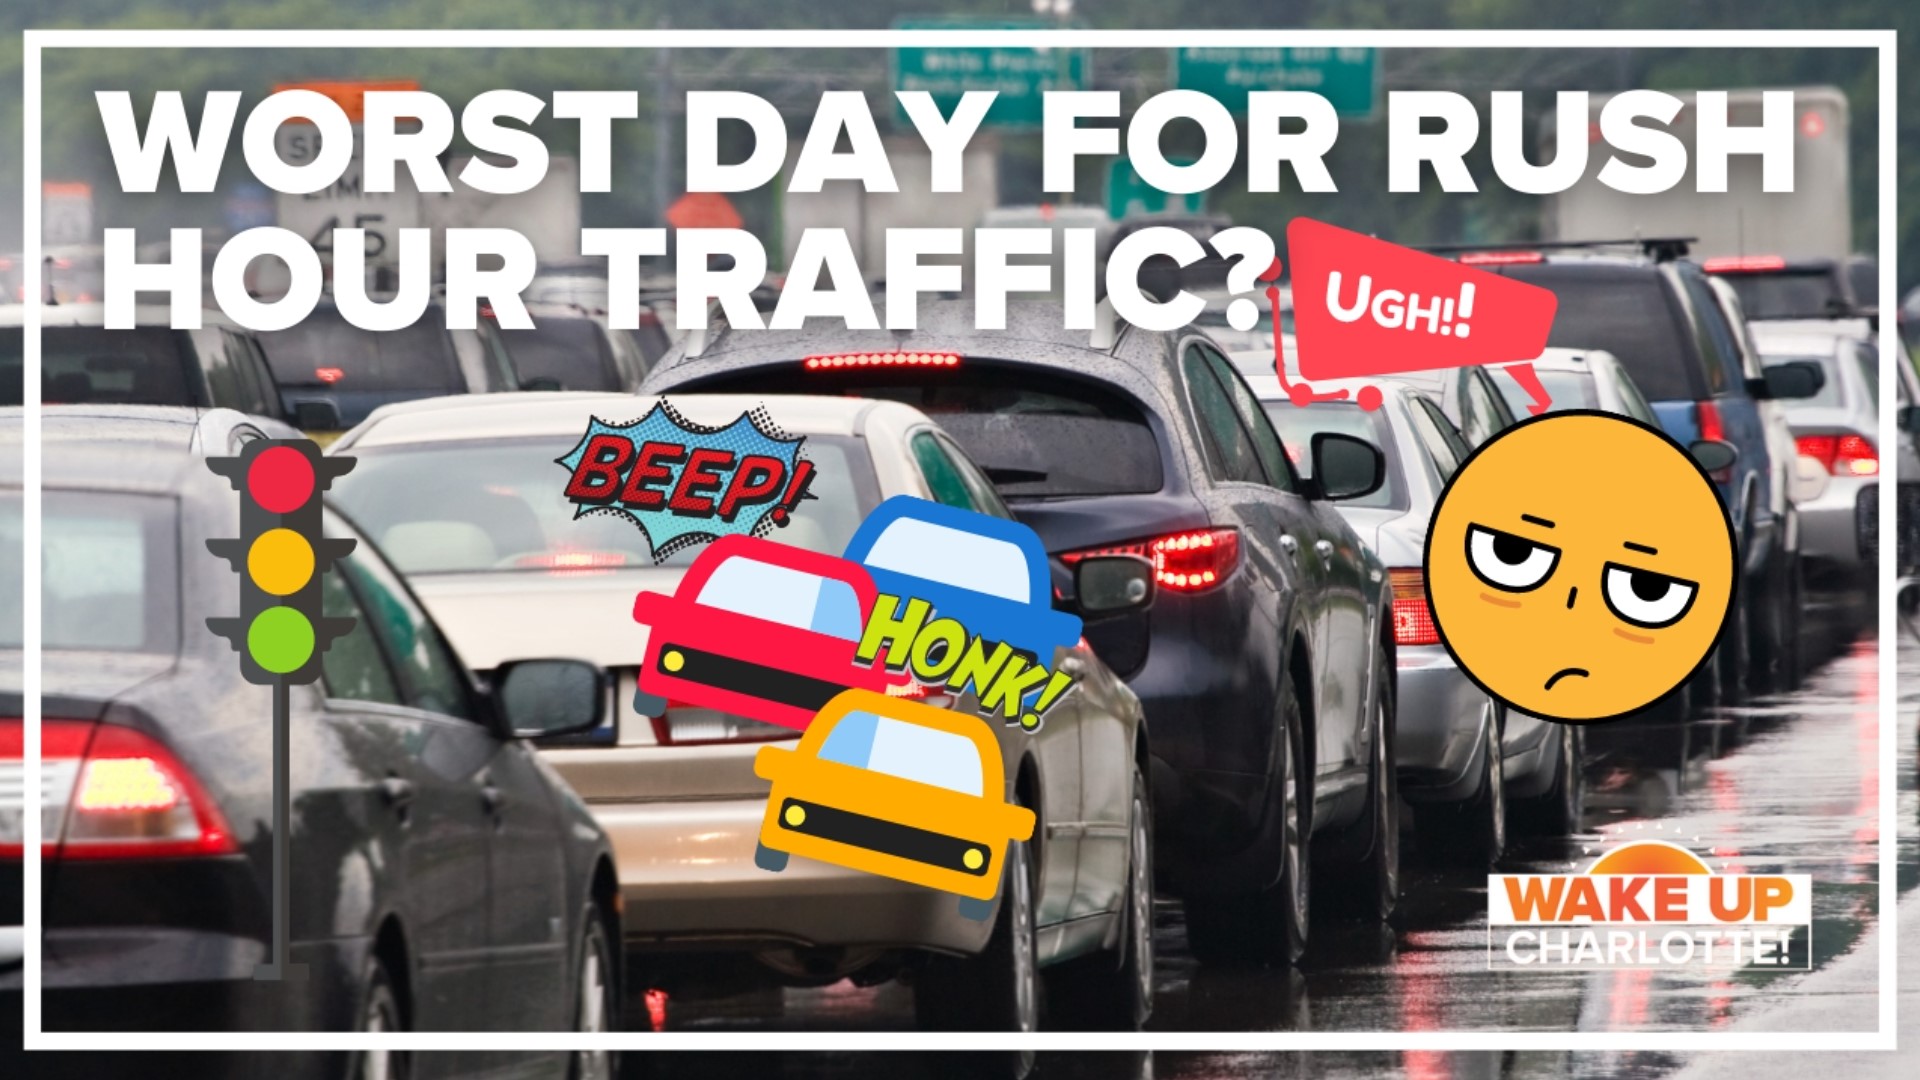 As more people are back at work, the traffic in the area can be a pain. However, is there a day that's worse for traffic than others?